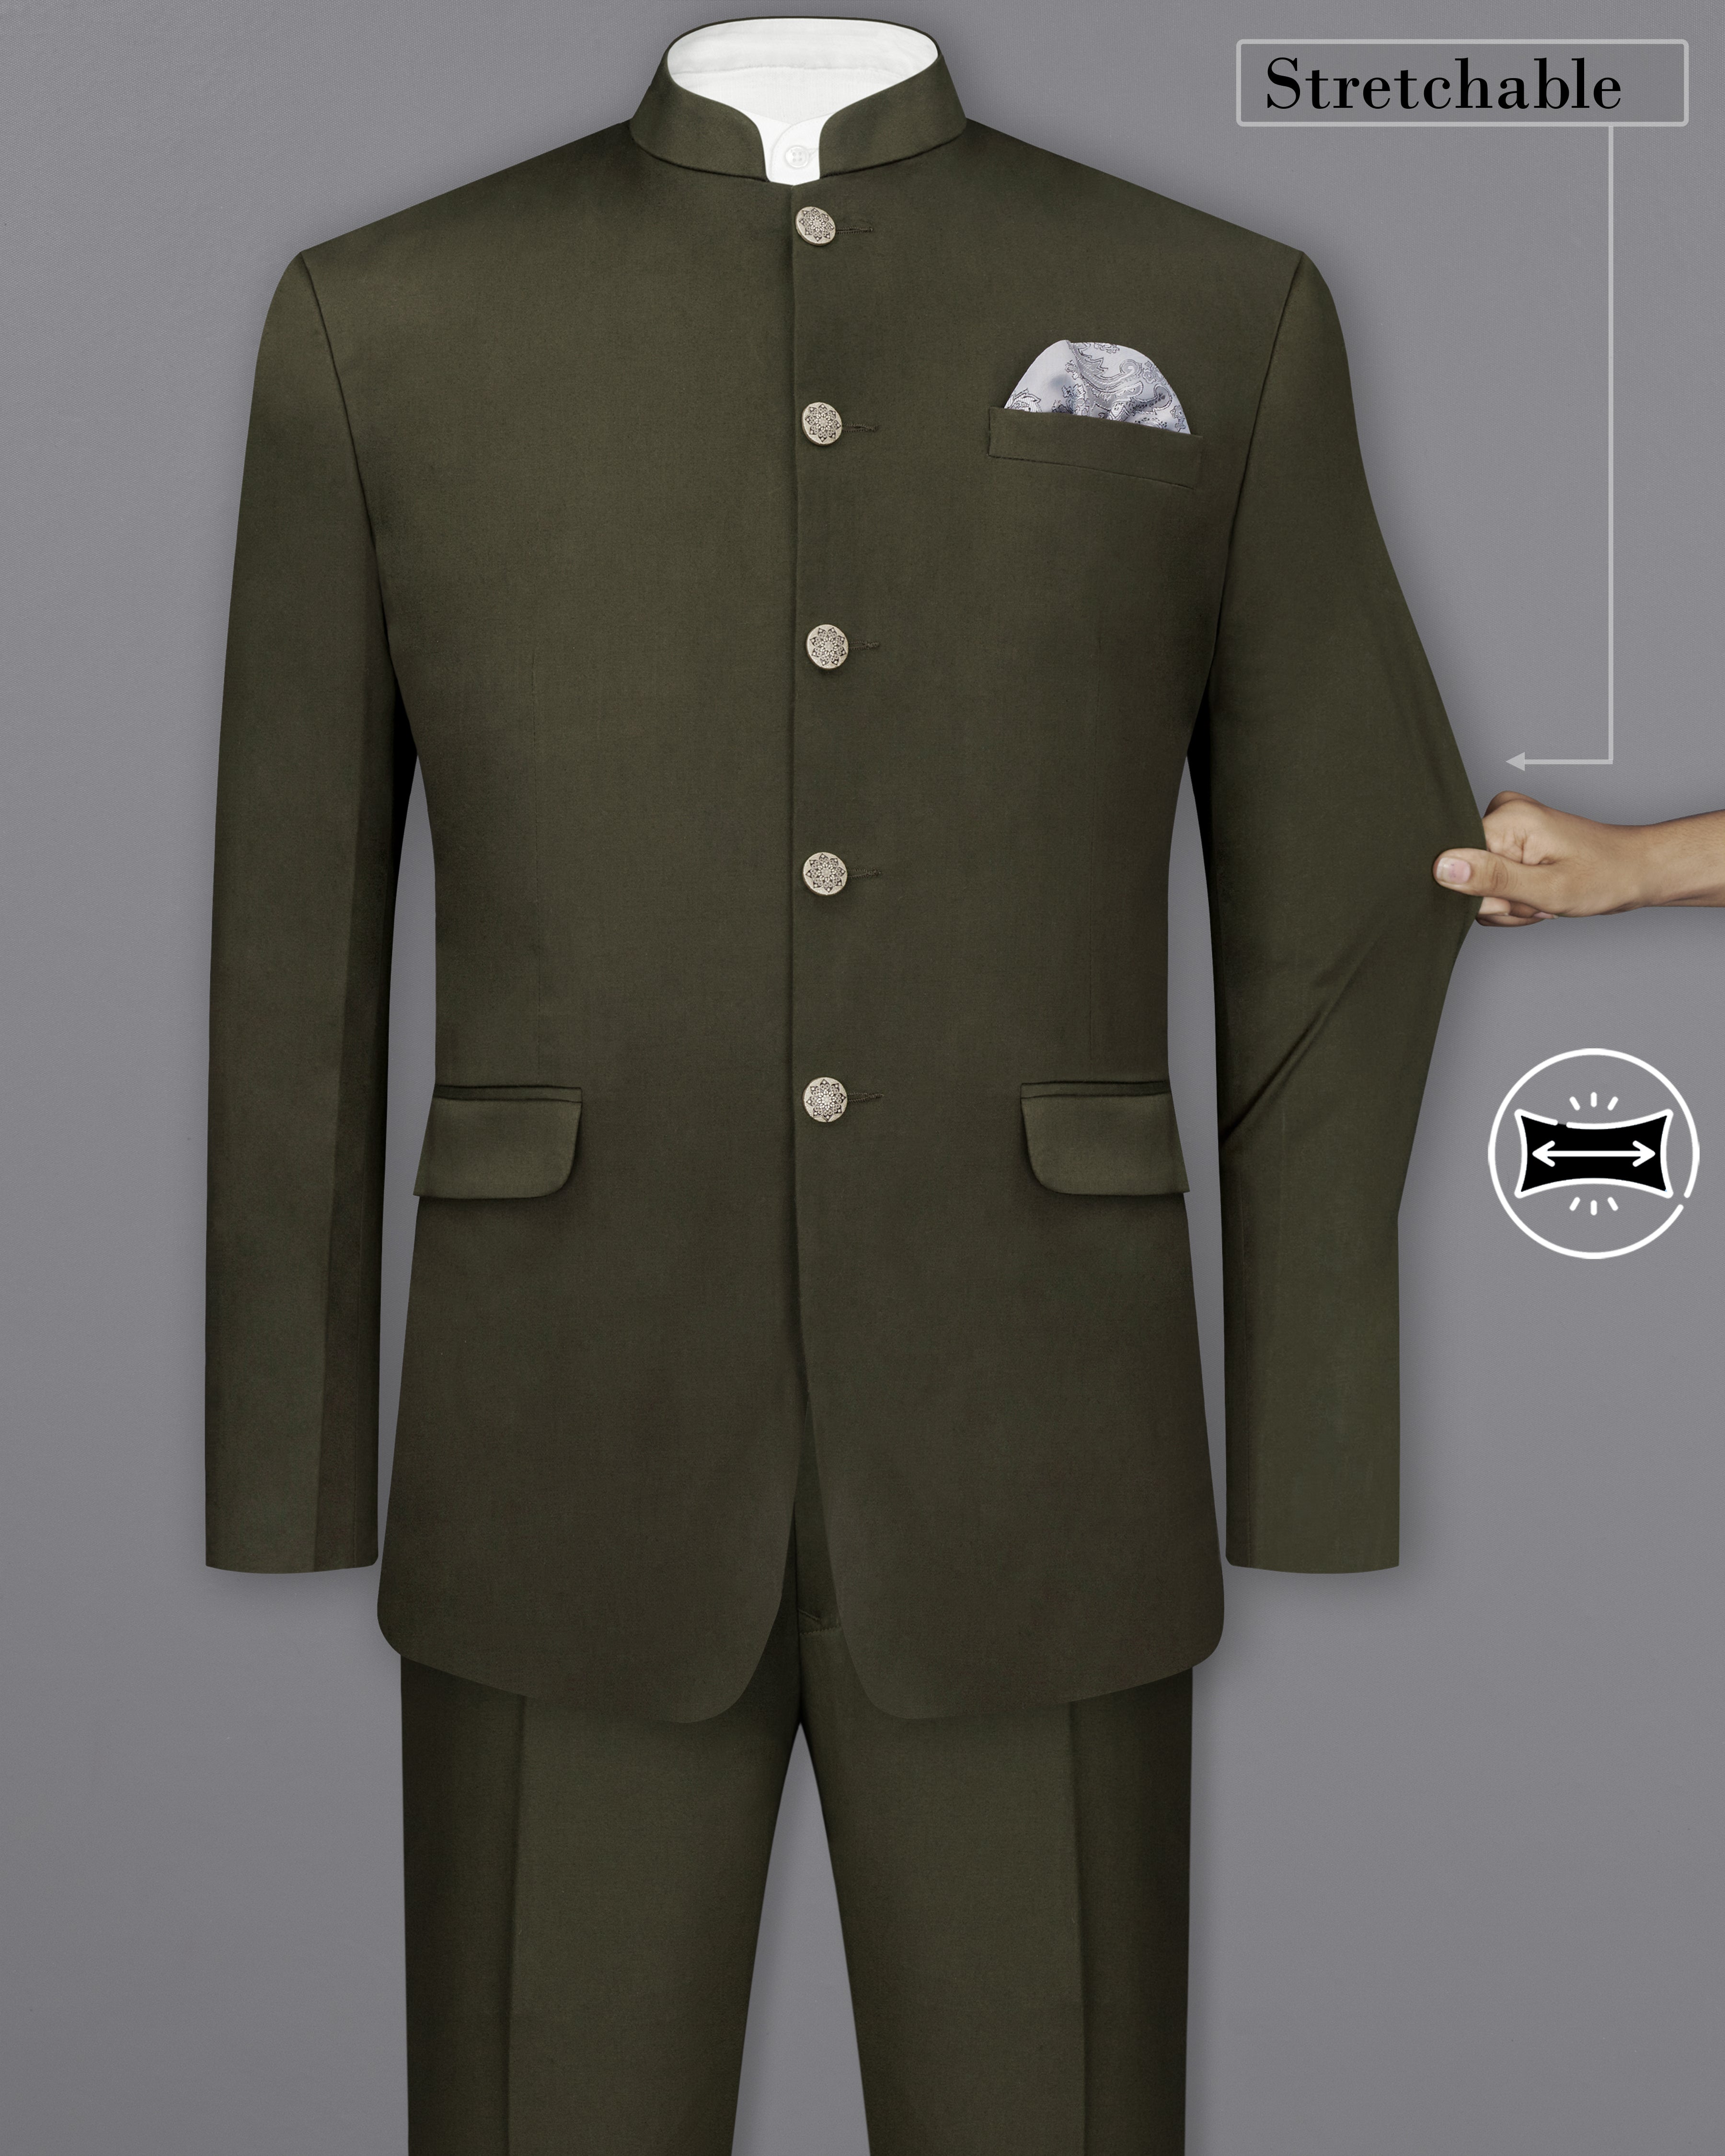 Taupe Green Solid Stretchable Premium Cotton Bandhgala traveler Suit ST2644-BG-36,ST2644-BG-38,ST2644-BG-40,ST2644-BG-42,ST2644-BG-44,ST2644-BG-46,ST2644-BG-48,ST2644-BG-50,ST2644-BG-52,ST2644-BG-54,ST2644-BG-56,ST2644-BG-58,ST2644-BG-60